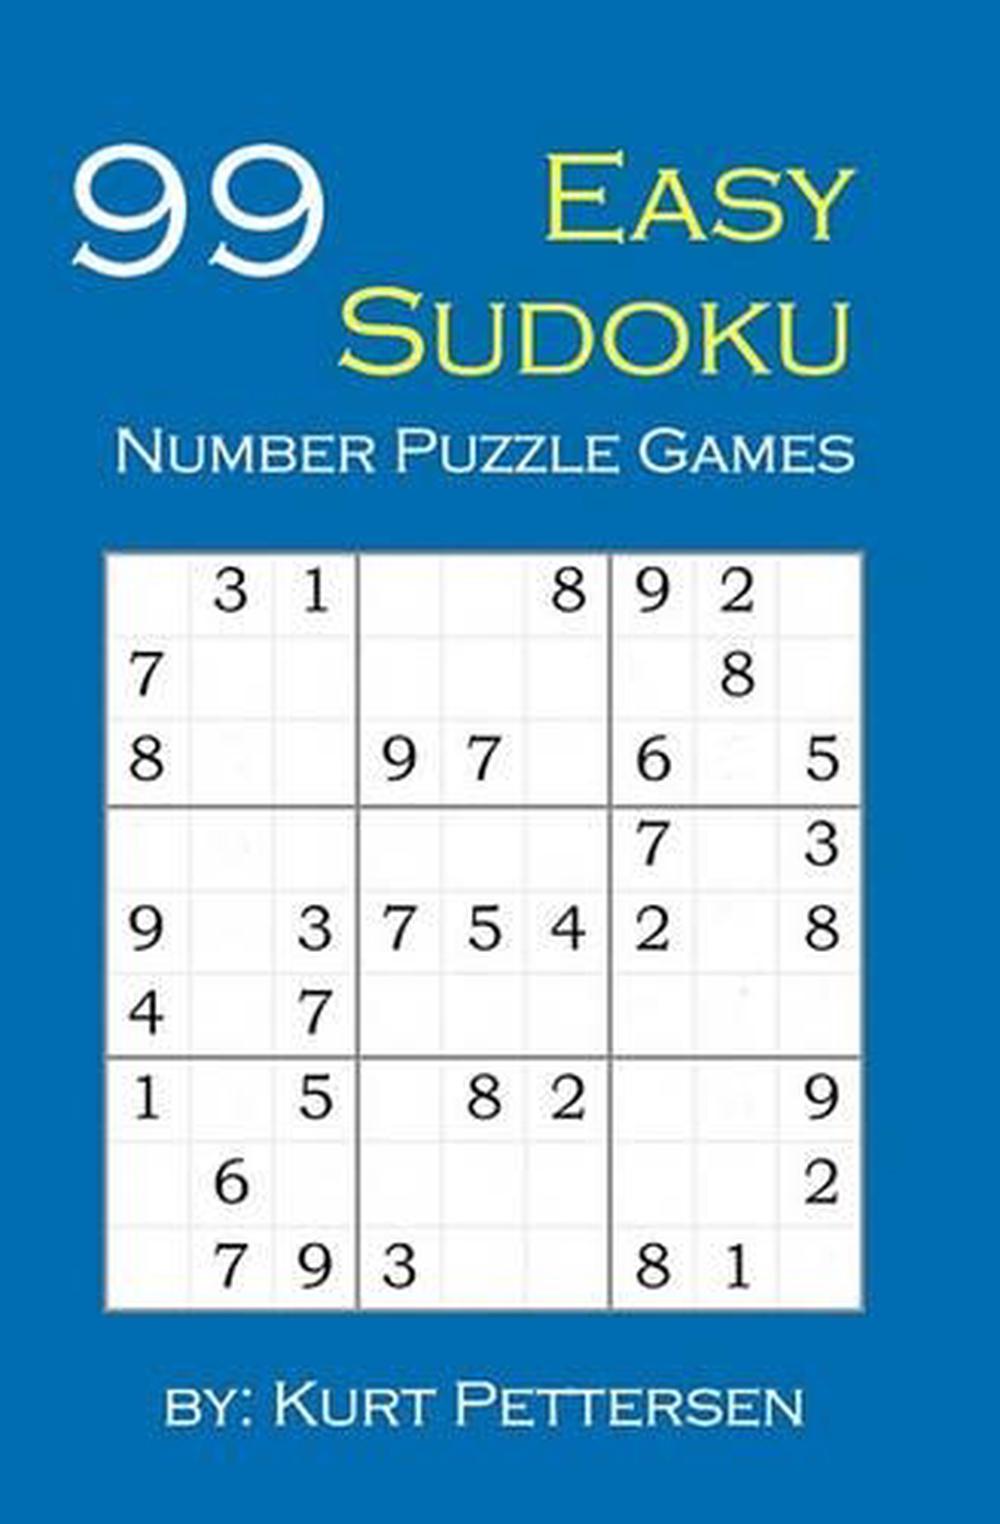 99 Easy Sudoku Number Puzzle Games: Fun for All Sudoku, Puzzle, and